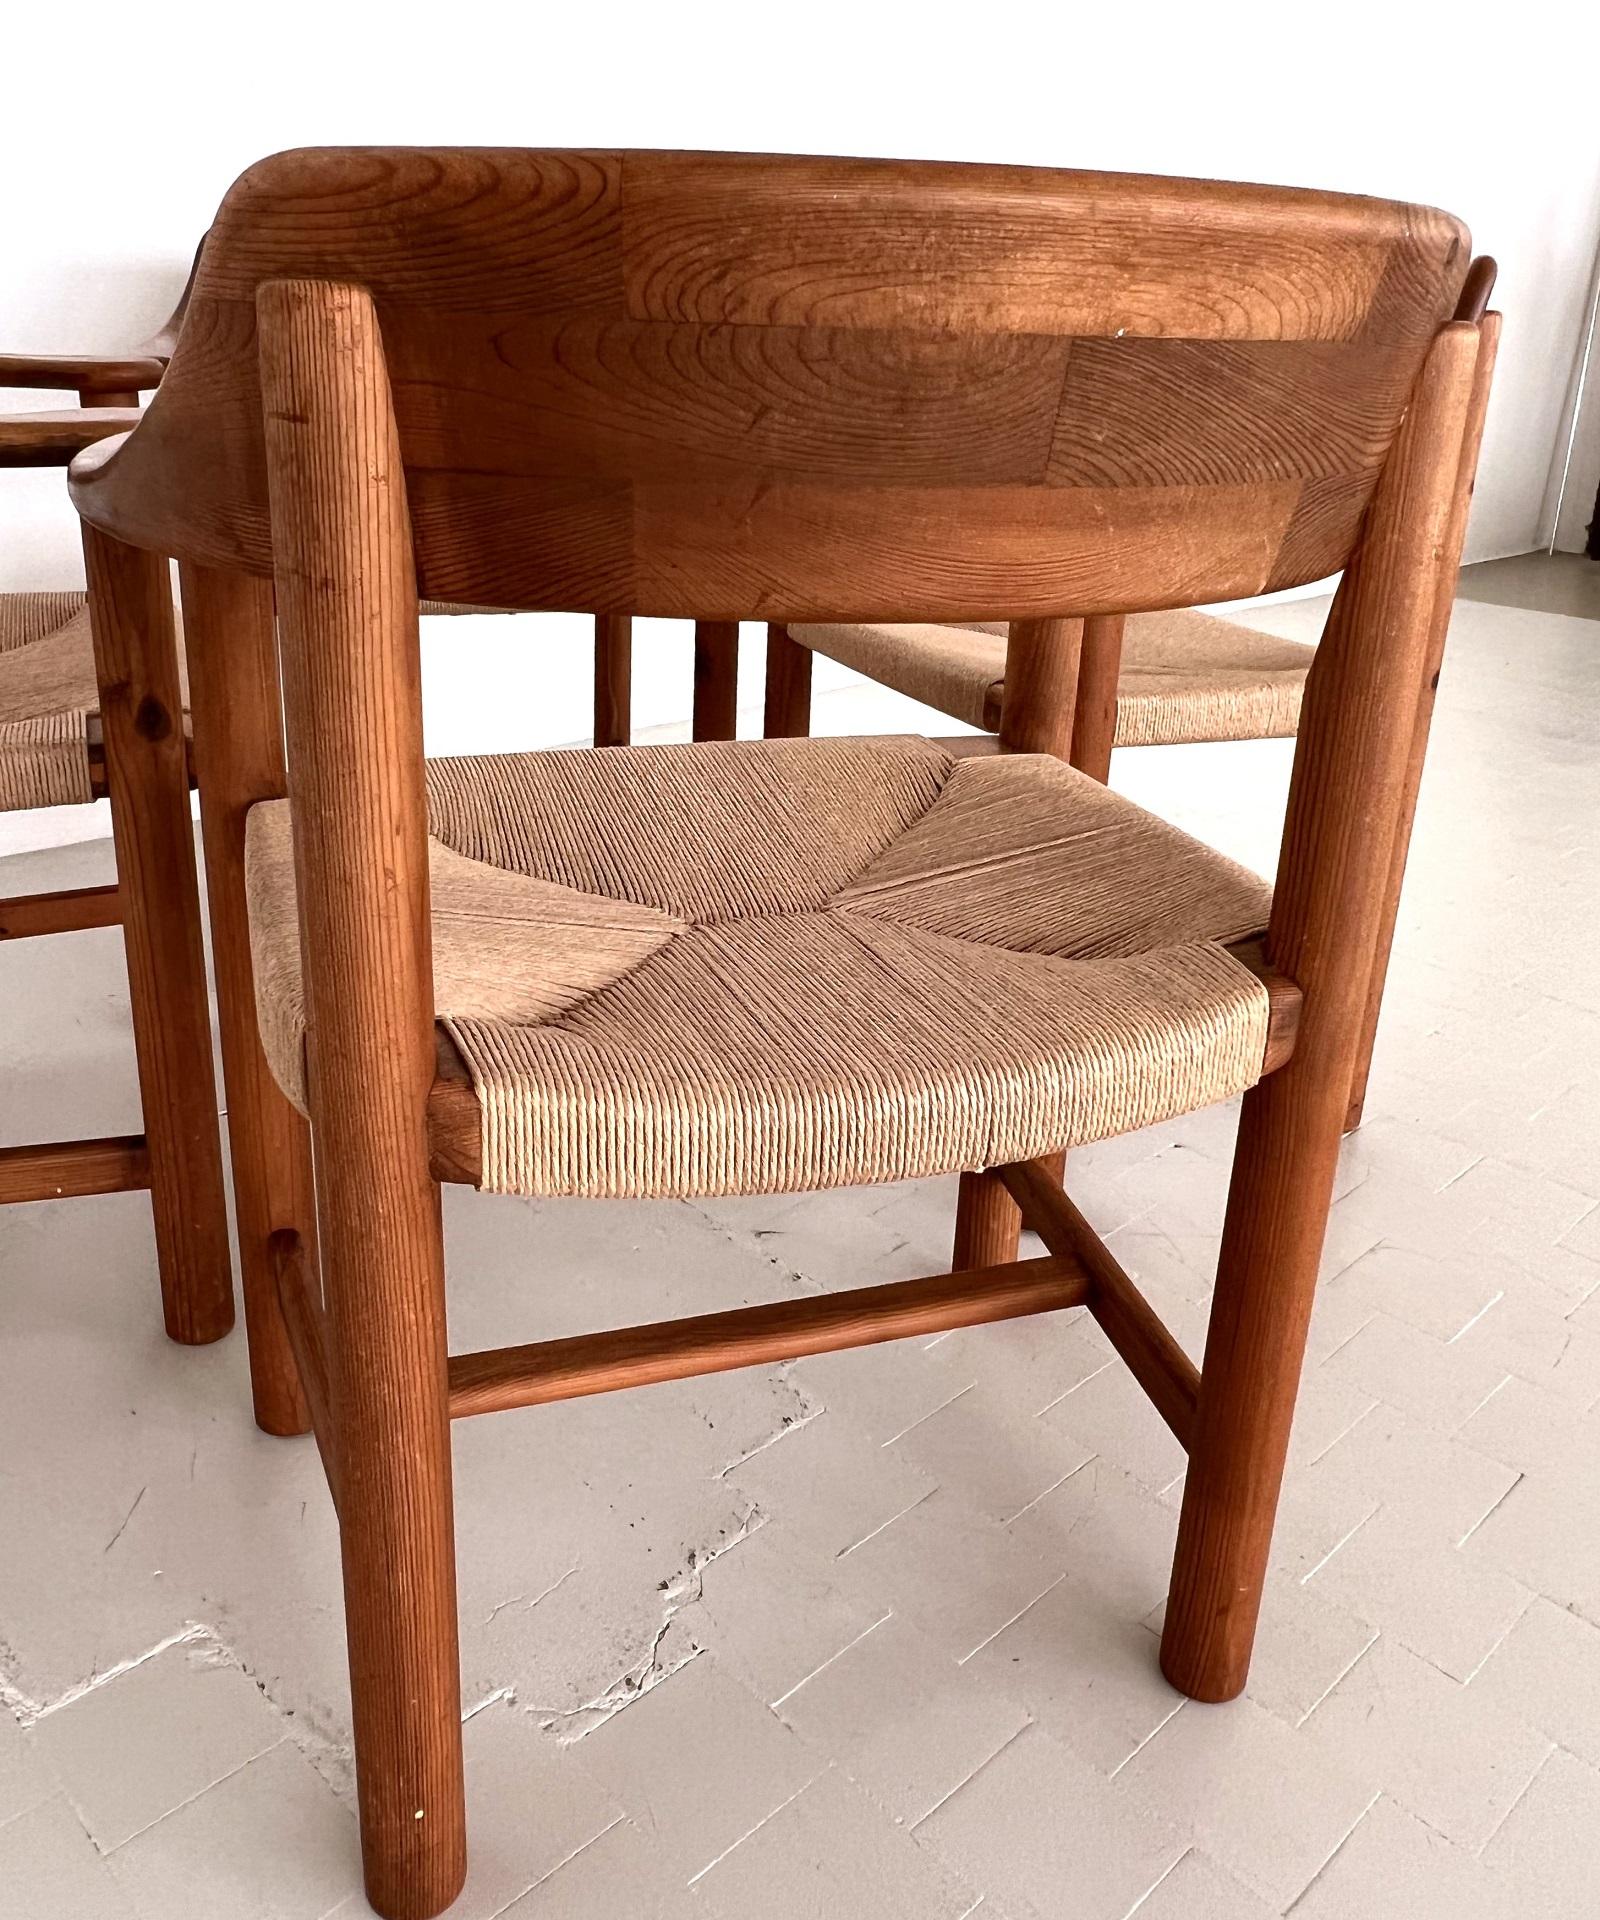 Danish Rainer Daumiller Dining Chairs in Pine and New Paper Cord, 1970s For Sale